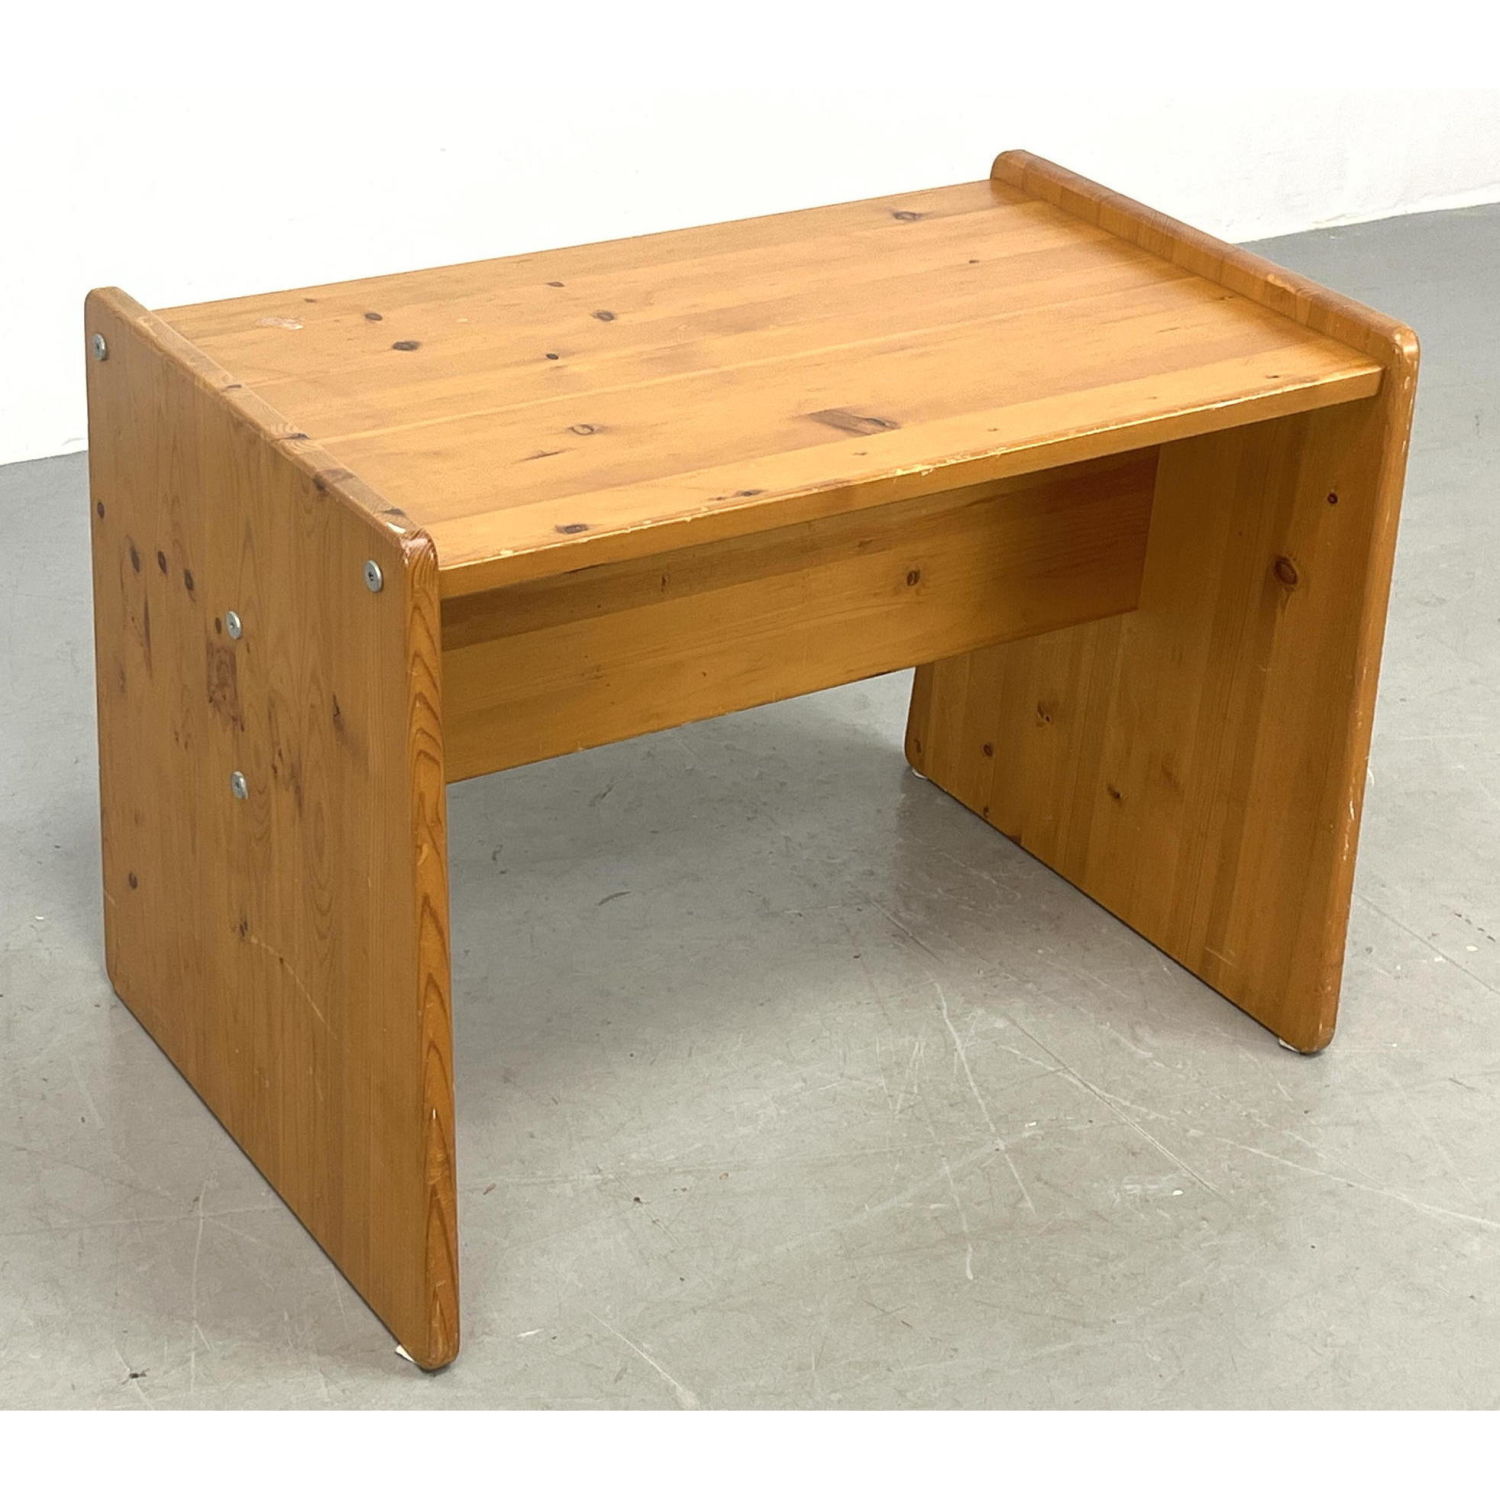 Modernist Pine Bench Stool. 

Dimensions: